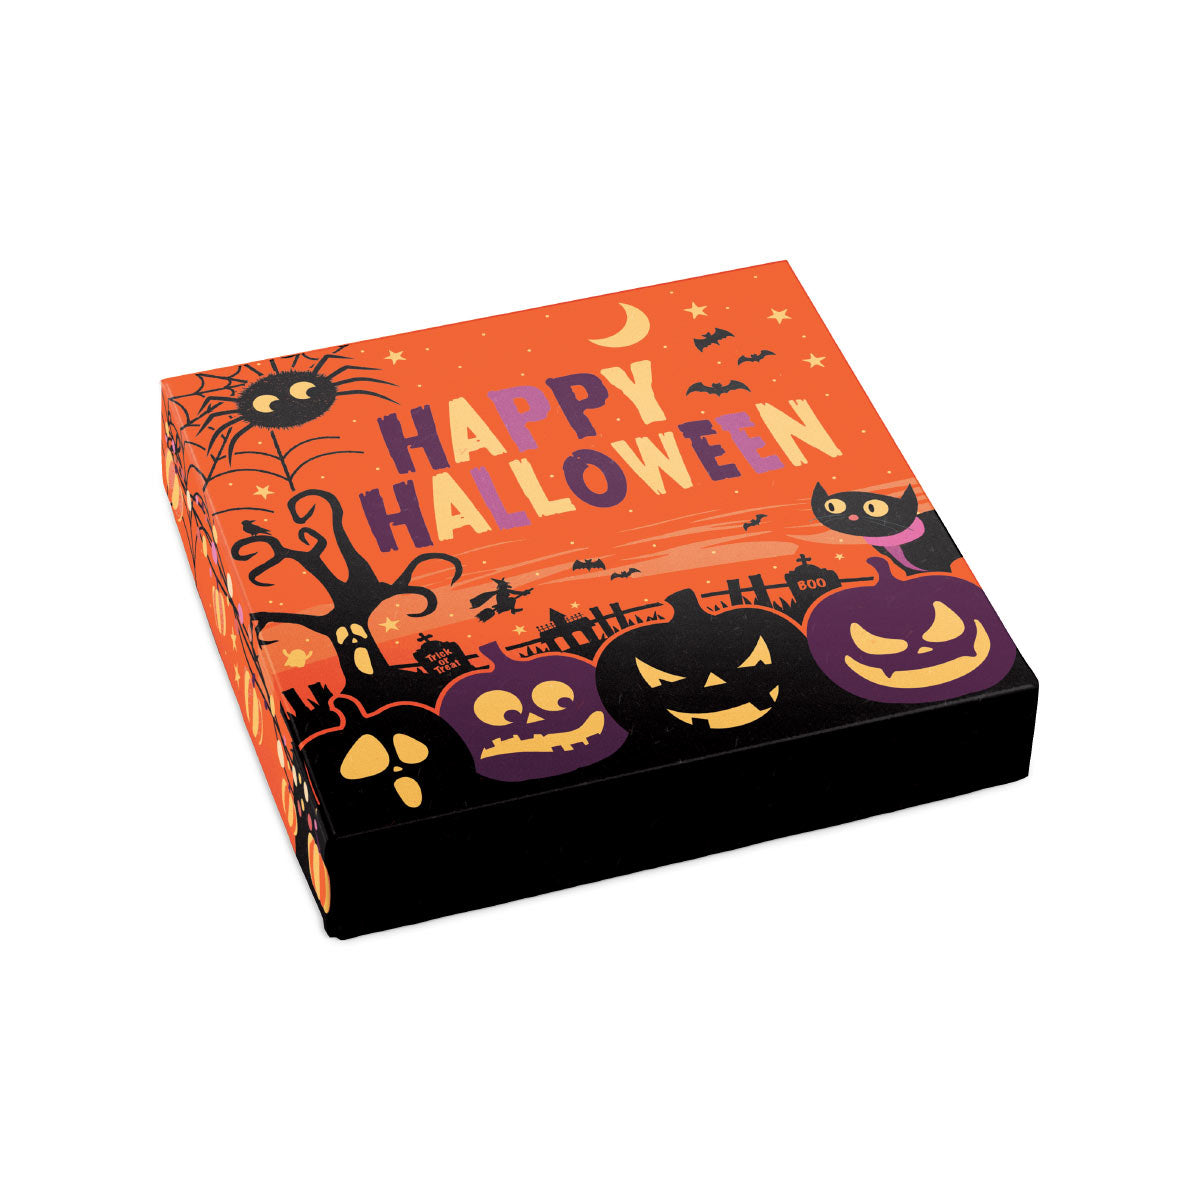 Halloween Themed Box Cover for 16 Piece Holiday Assortment